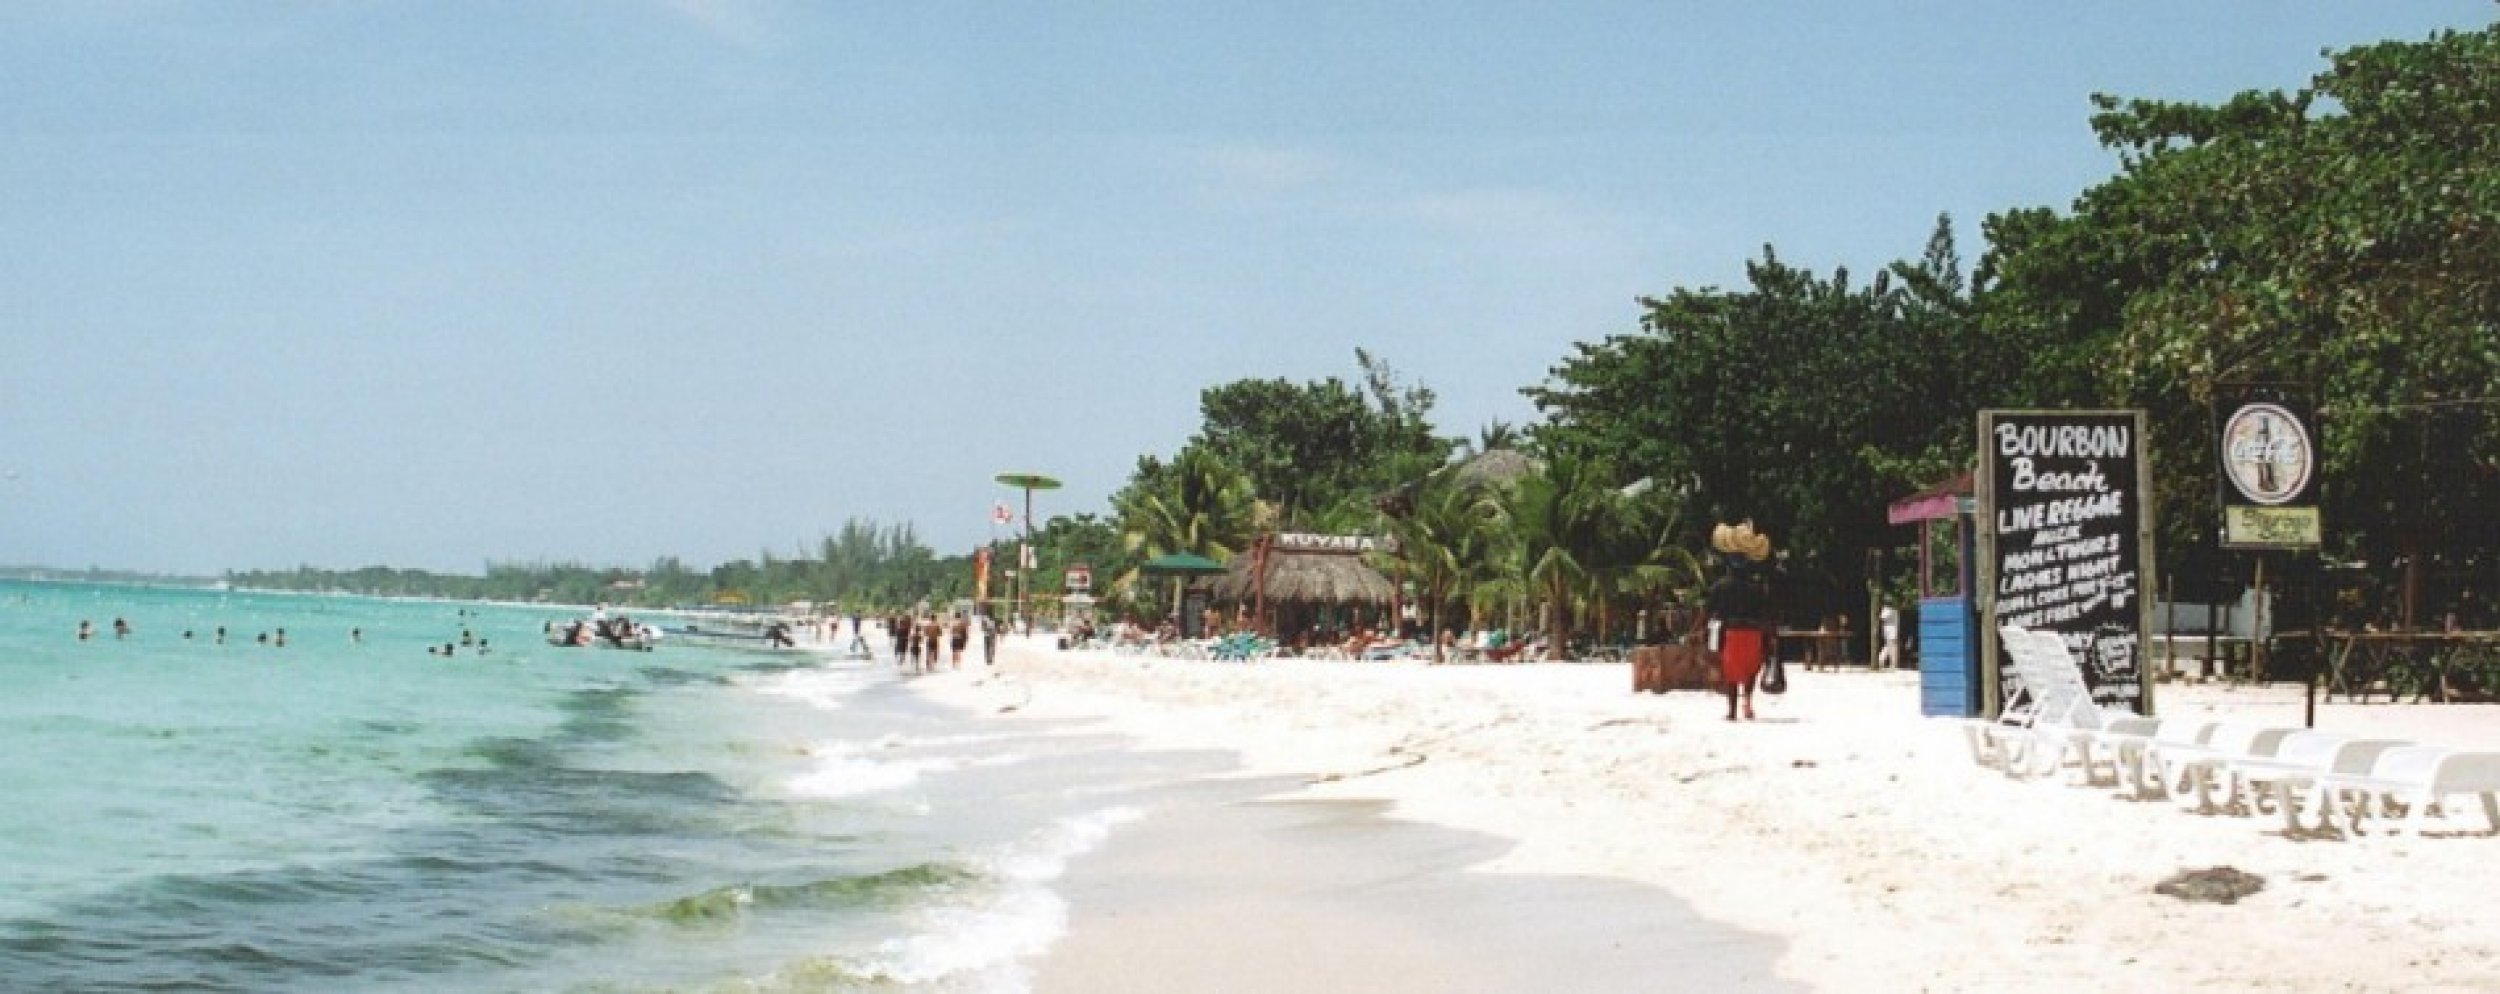 6. Beach holiday in Negril, Jamaica